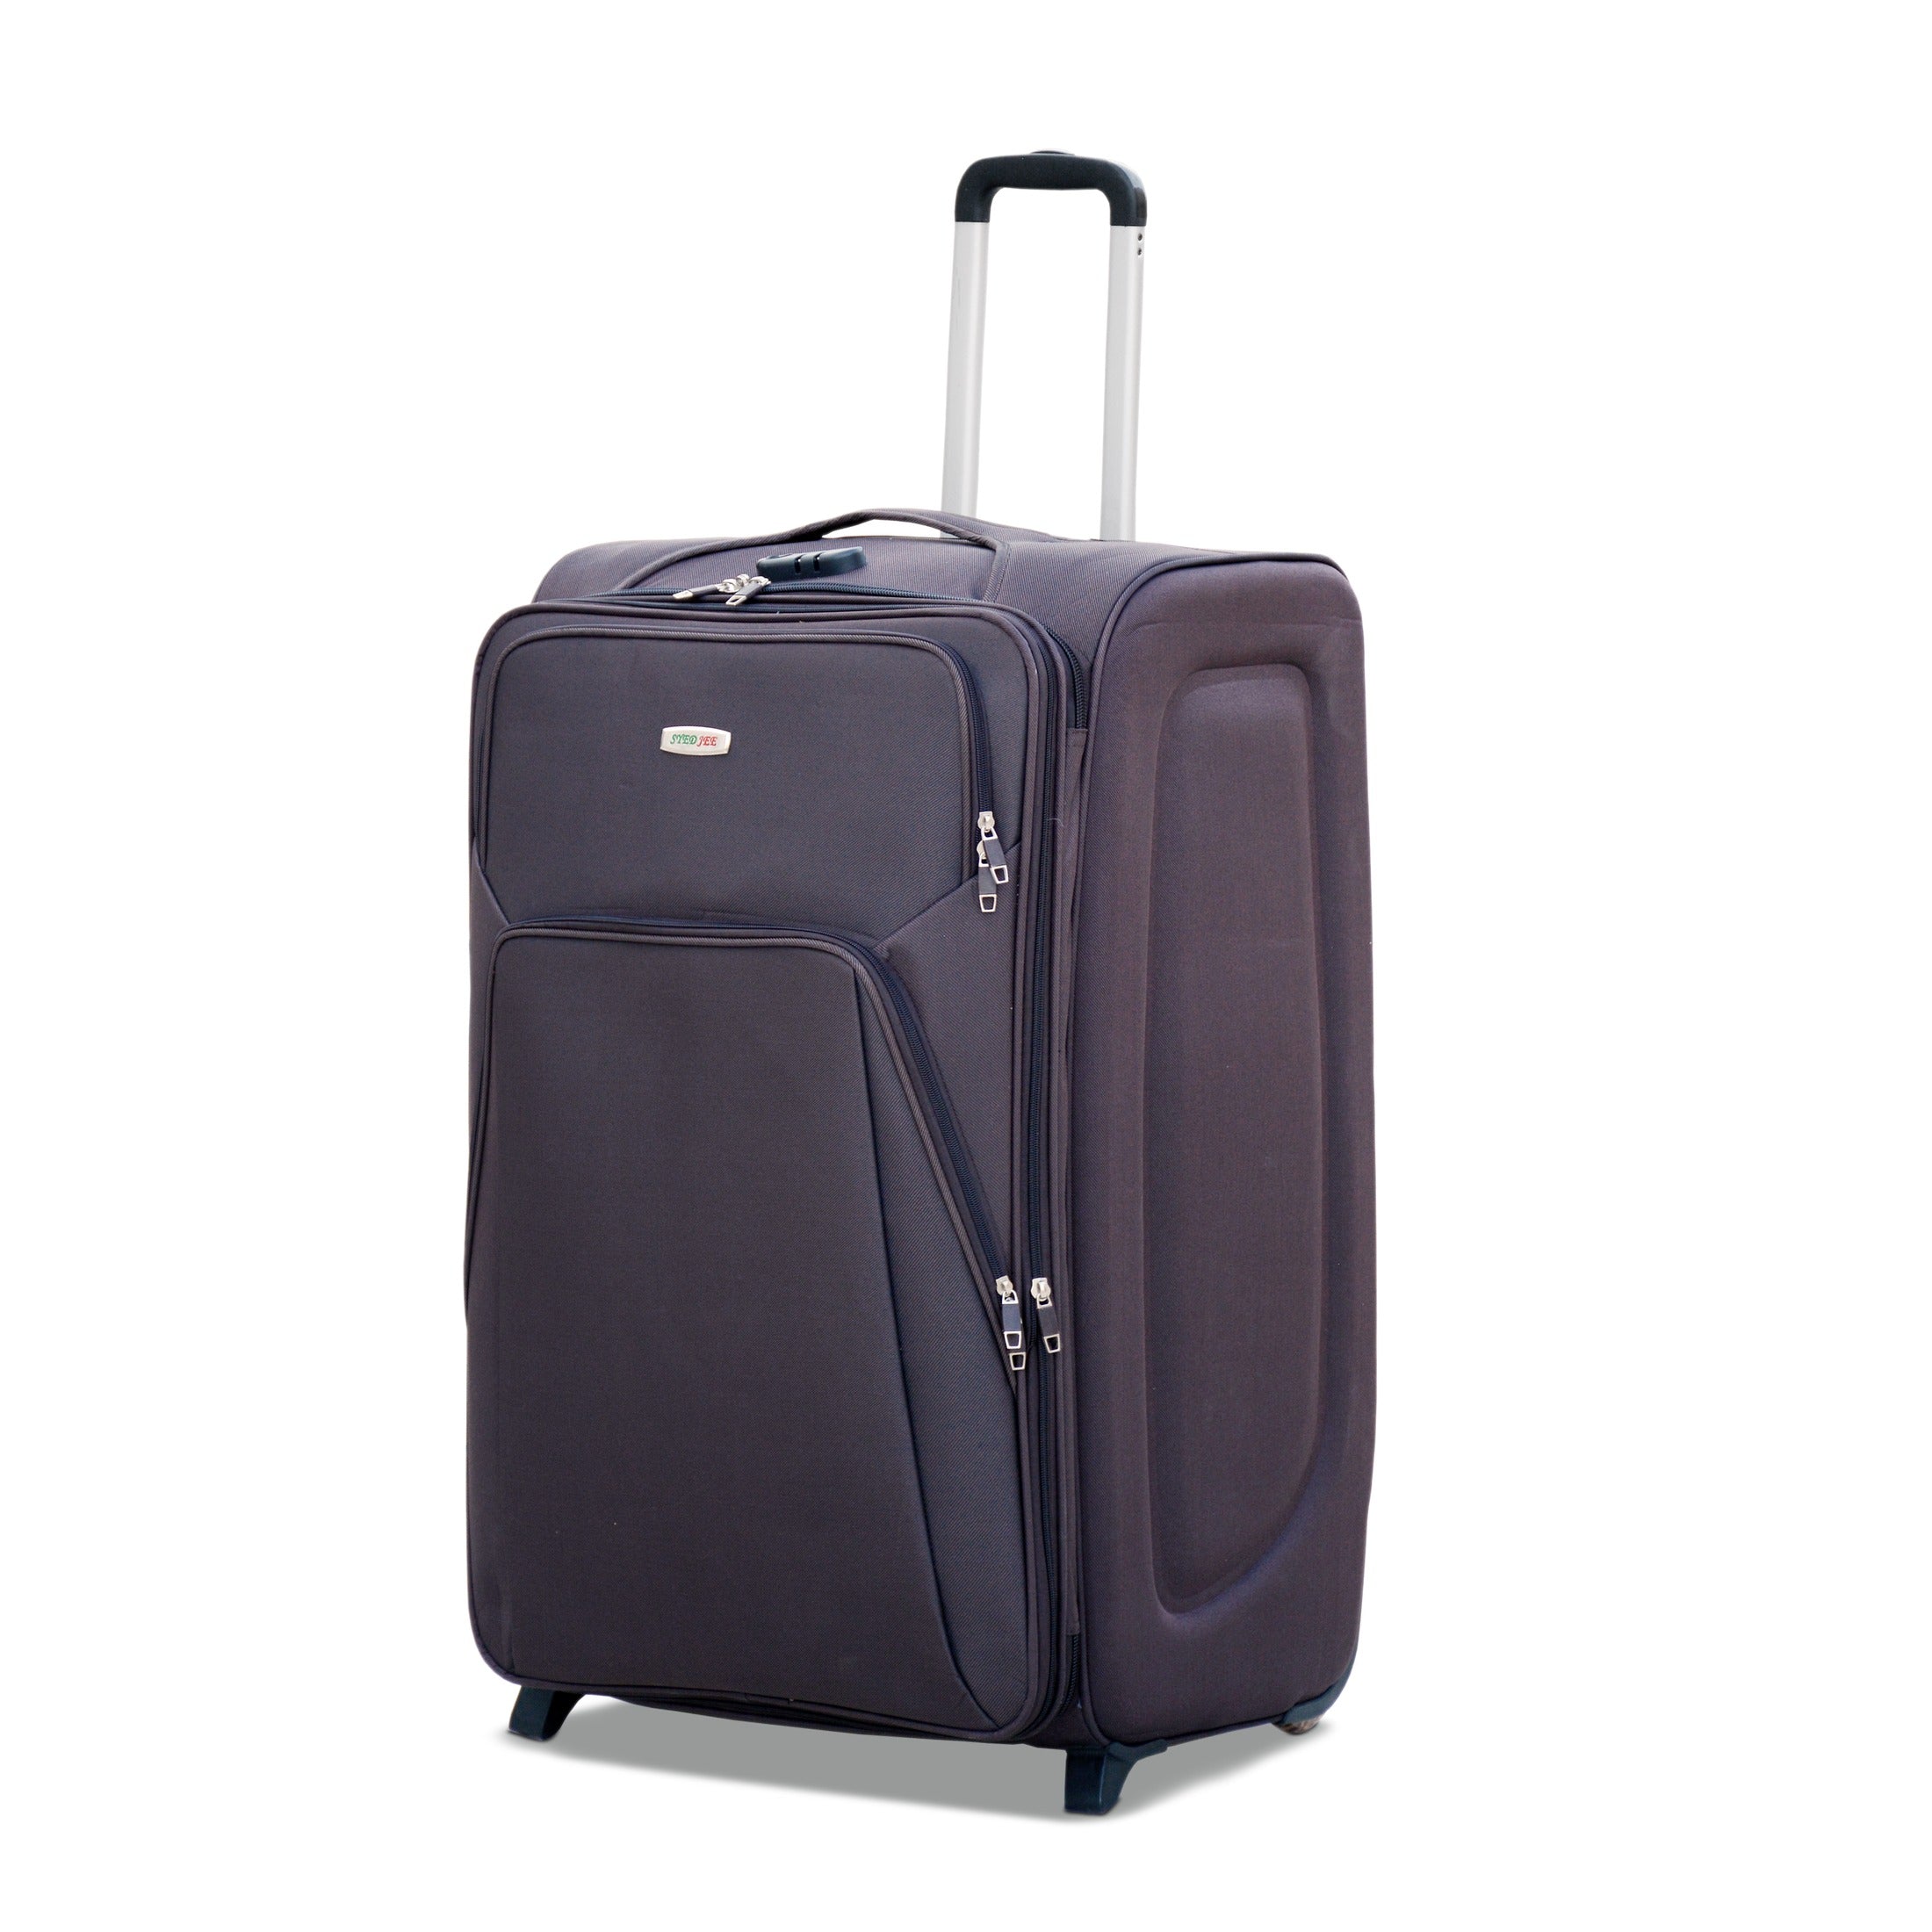 Soft Material Luggage Coffee Colour 30 - 35 Kg 2 Wheel Travel Luggage